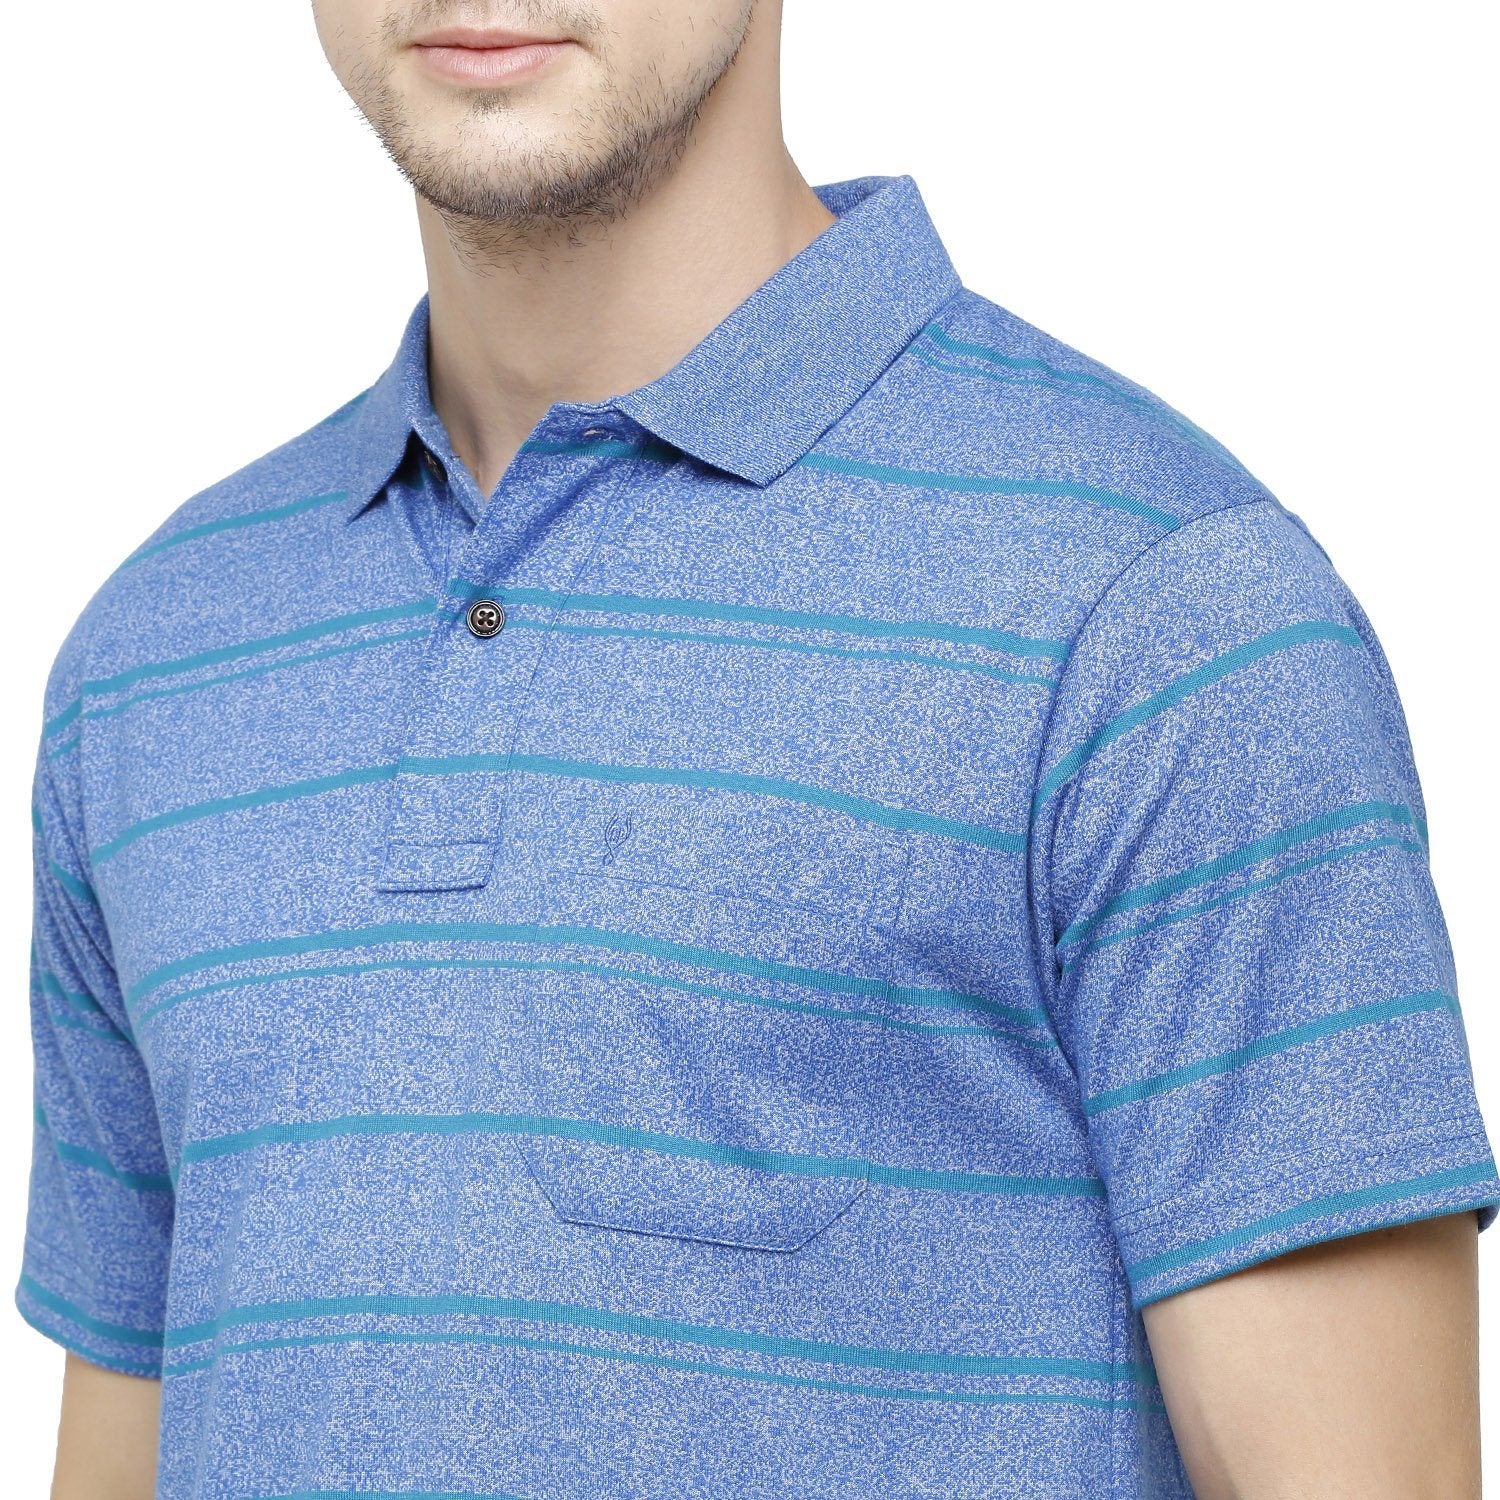 Classic Polo Mens Striped Polo Neck Half Sleeve Regular Fit Cotton Polyester Blend Blue Fashion T-Shirt ( AVON - 469 B AF P ) T-shirt Classic Polo 